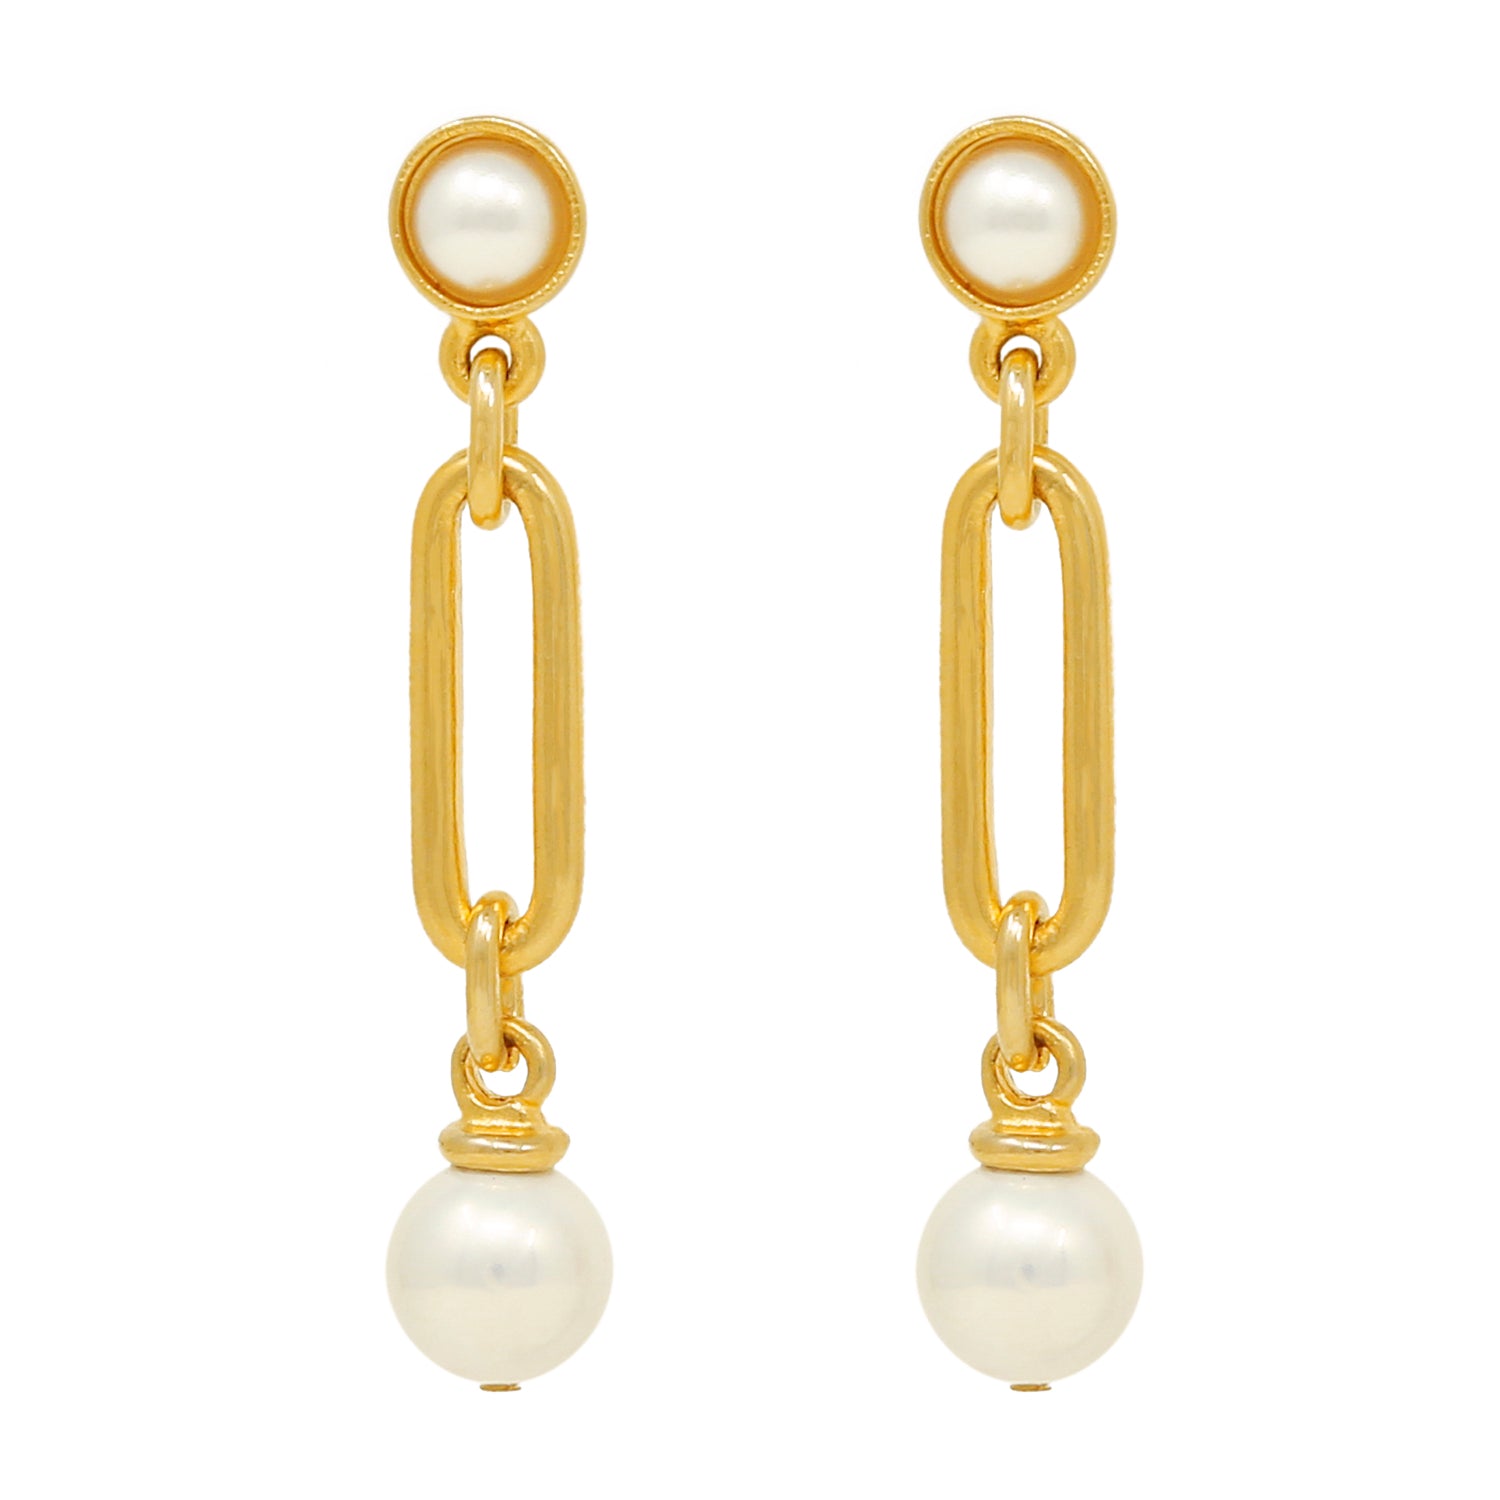 How to Style Pearl Earrings - Majorica News